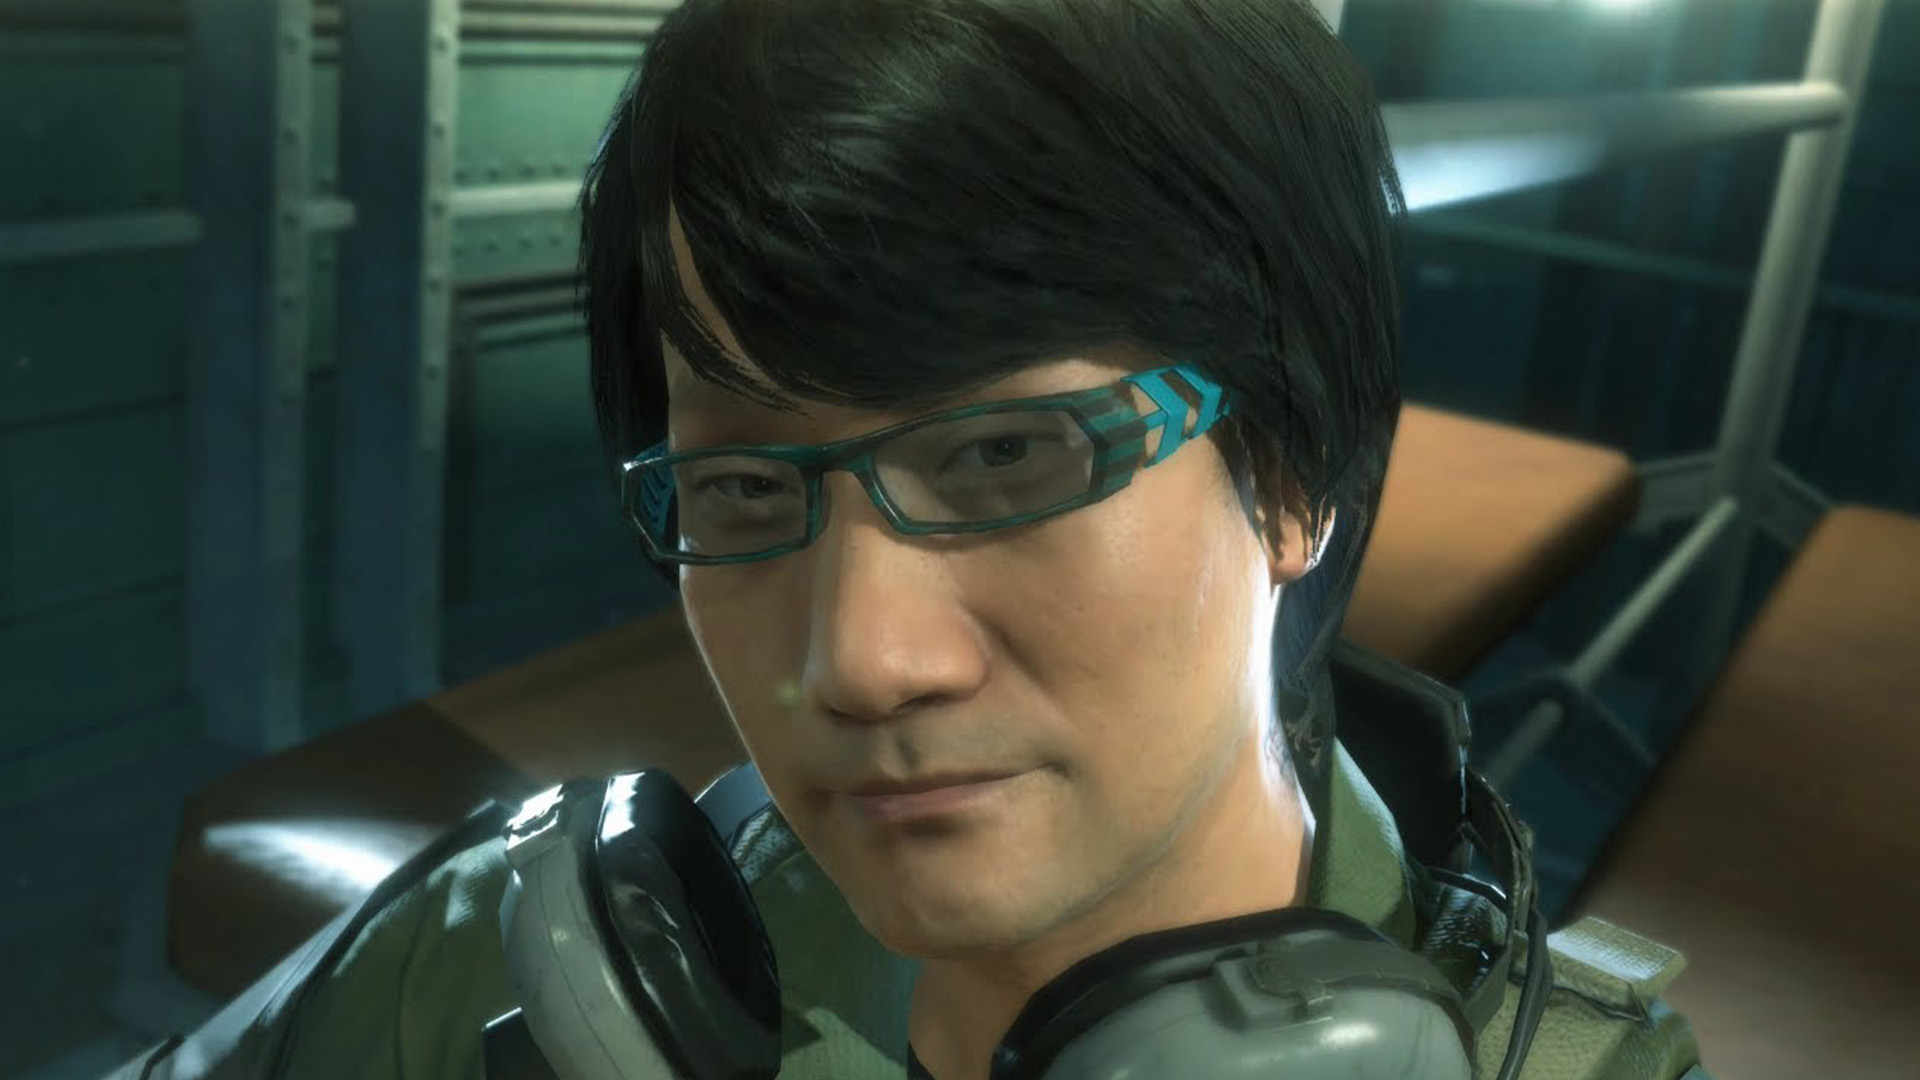 Angry fans accuse Hideo Kojima of betrayal for collaborating with Xbox  (what angry fans??) : r/metalgearsolid